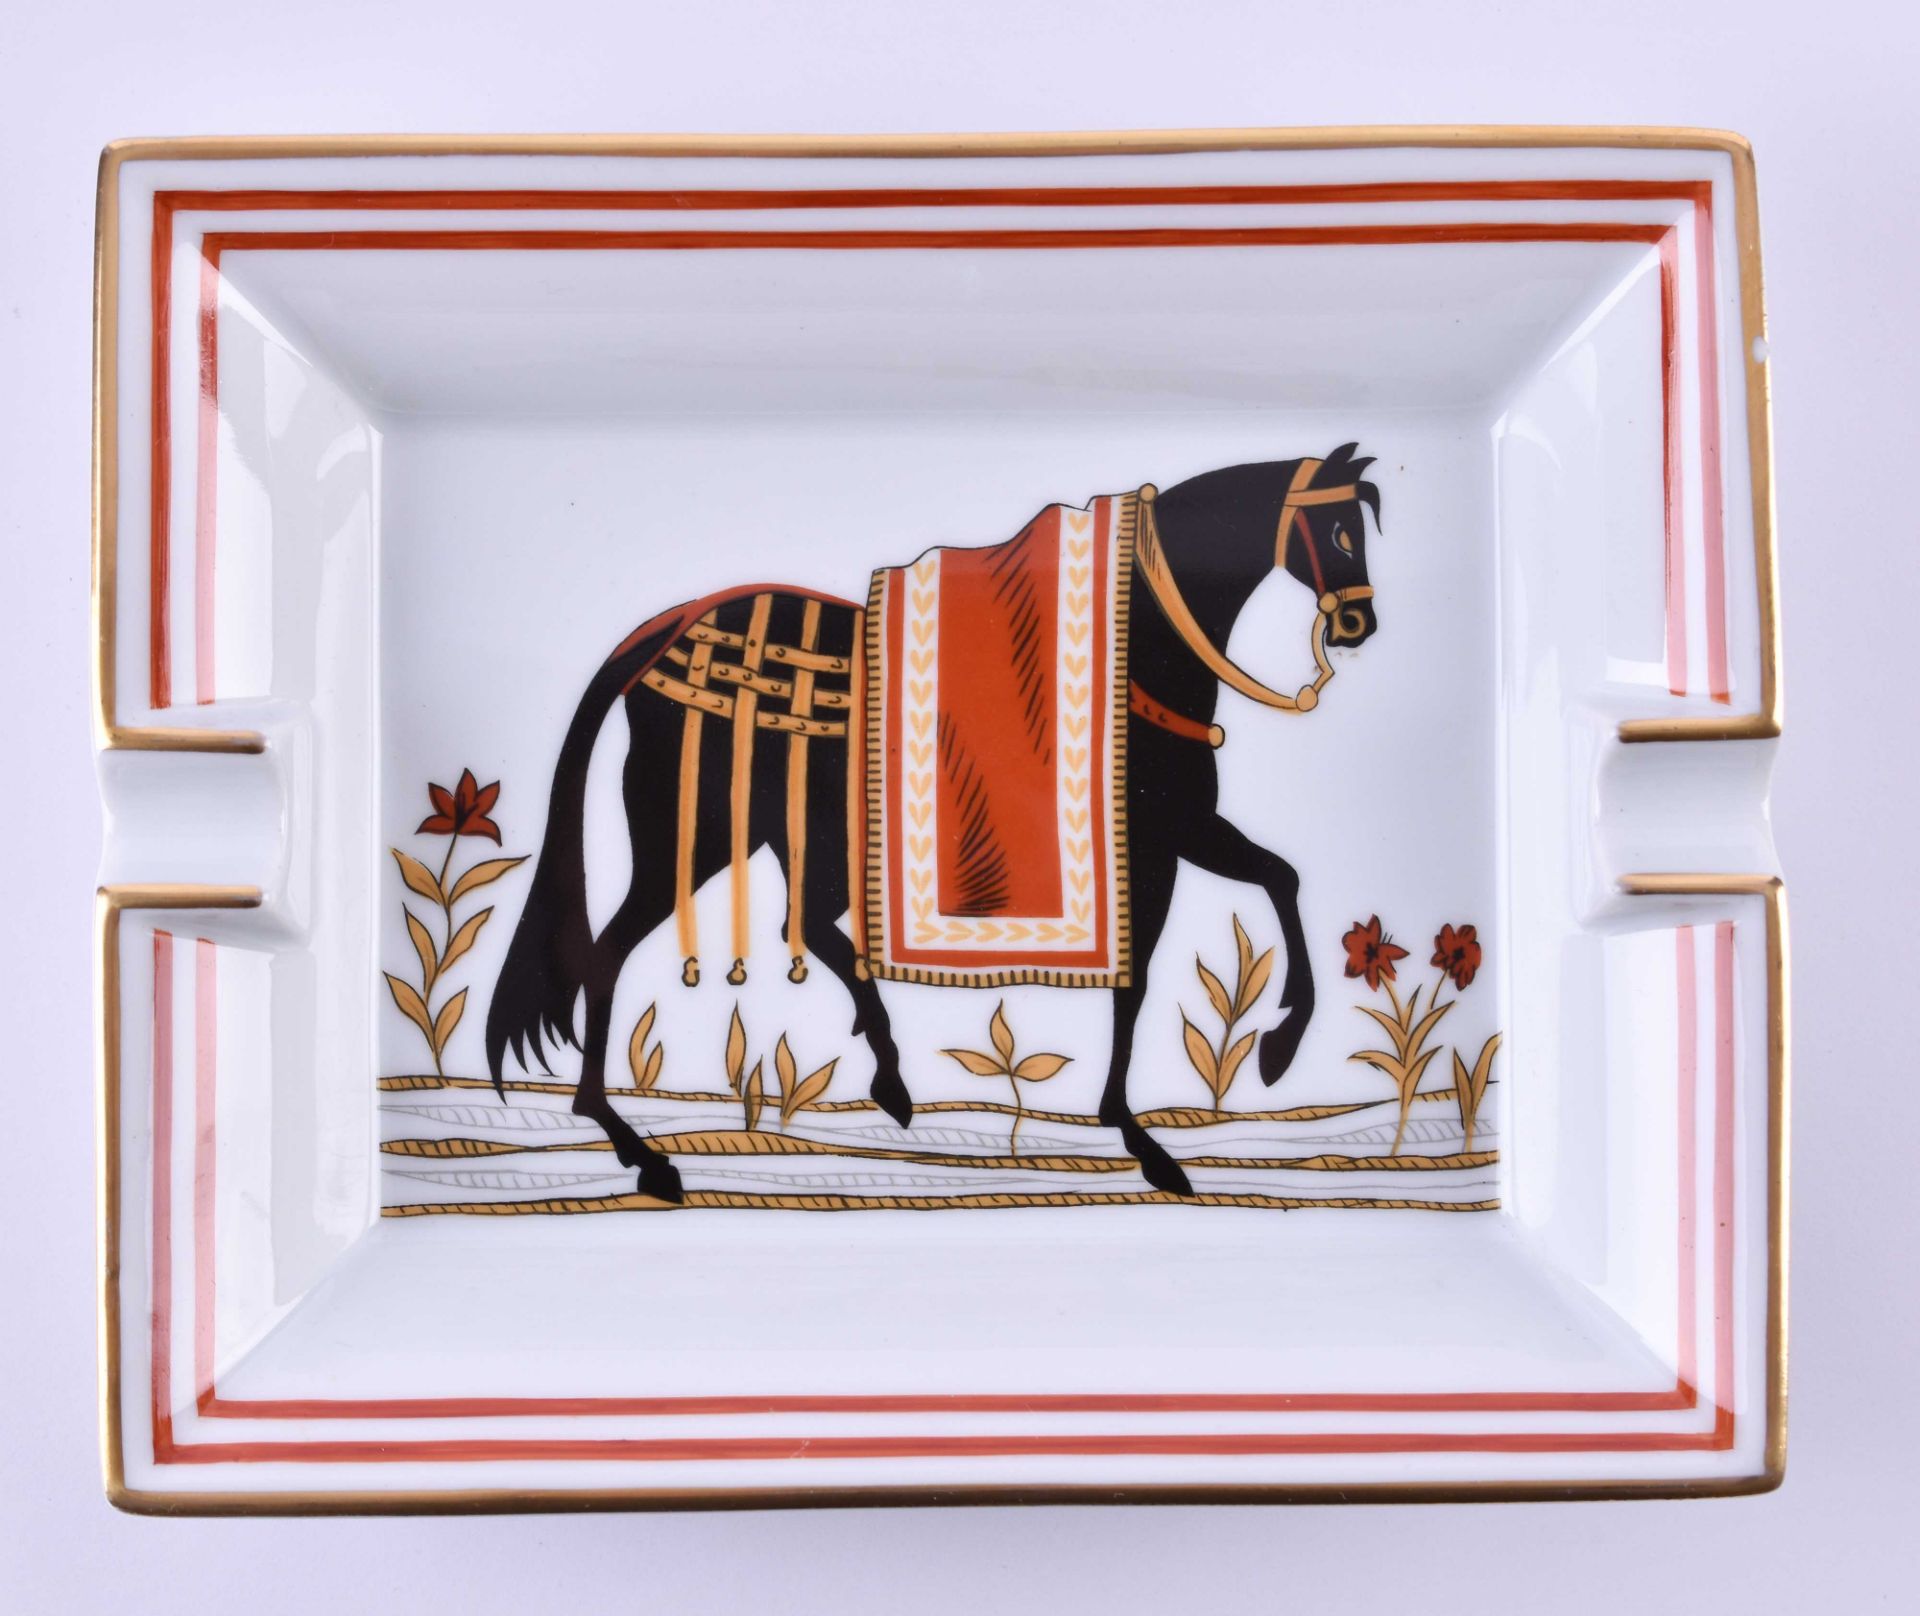 Ashtray Hermèscolored and gold, small chip in the gold rim, decor with horse, 20 cm x16